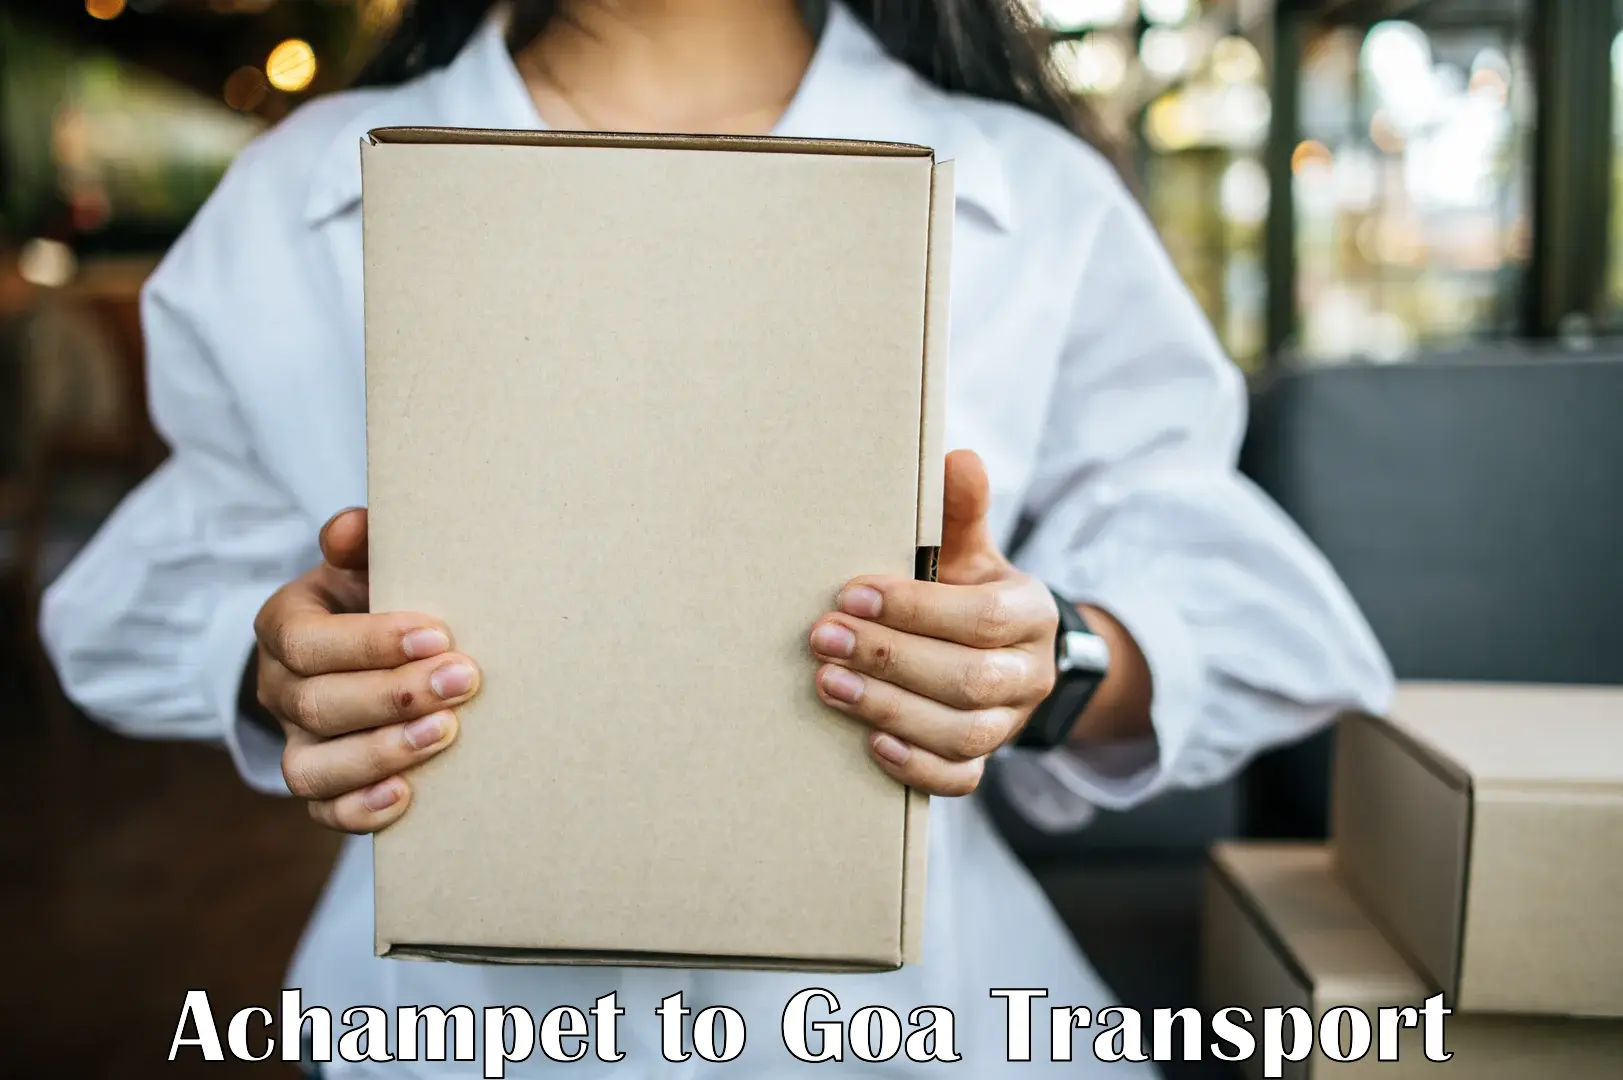 Container transport service Achampet to Goa University